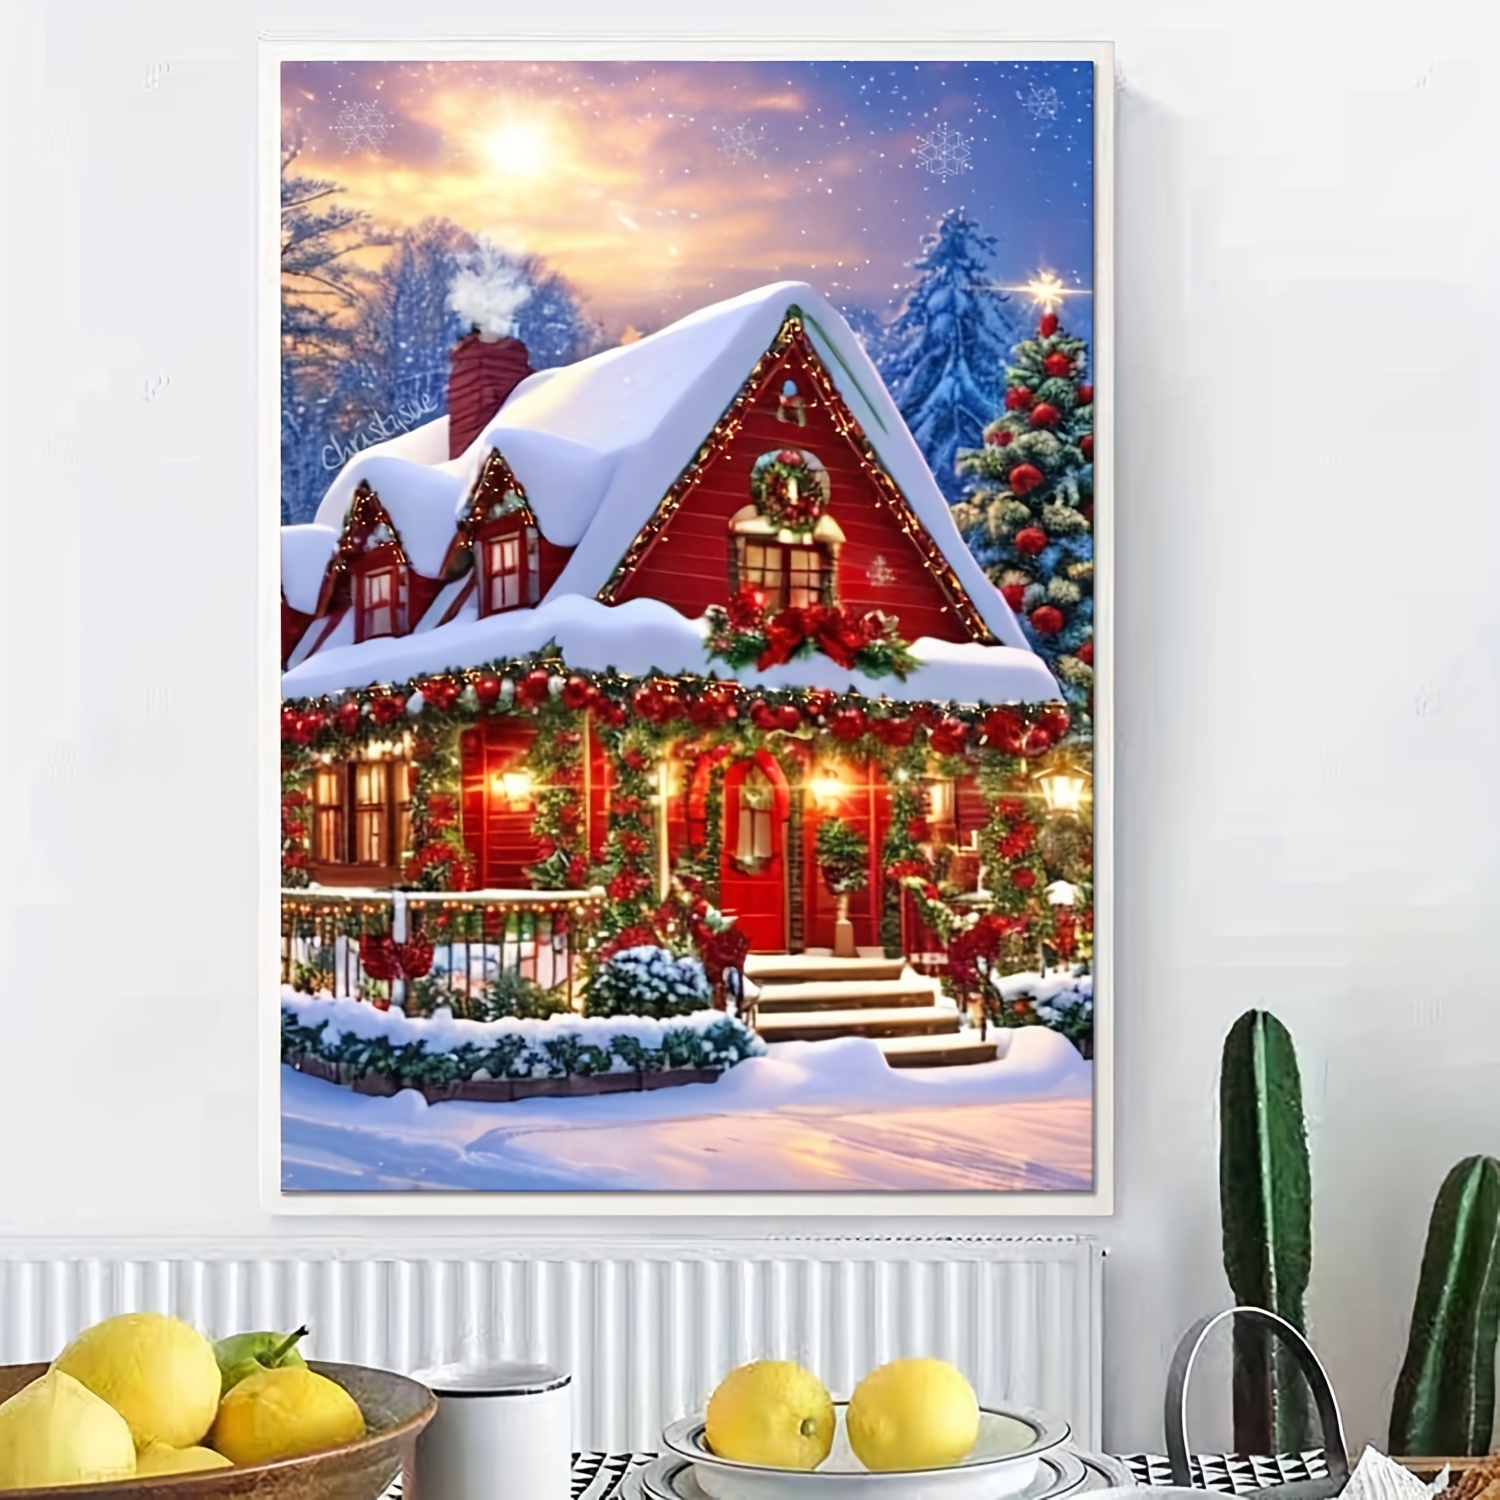 Buy Christmas Diamond Painting Kits - Cardinal Diamond Art Kits for Adults  Beginners,DIY 5D Winter Friends Paint with Diamond Pictures Round Full  Drill Gem Art Snowy Winter Cratfs Wall Decor(11.8x15.7in) Online at